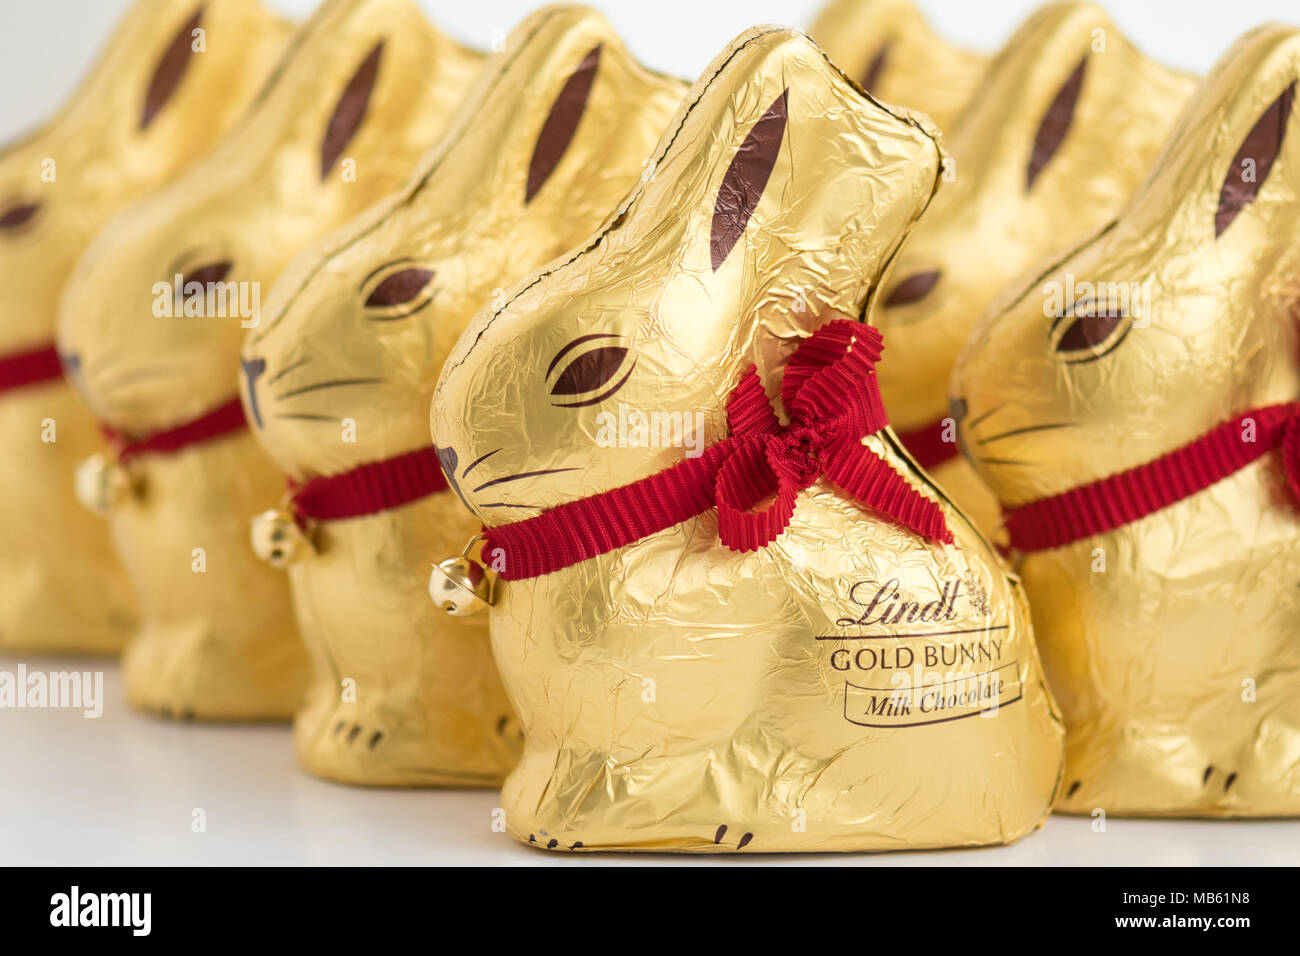 Lindt chocolate gold bunny Stock Photo